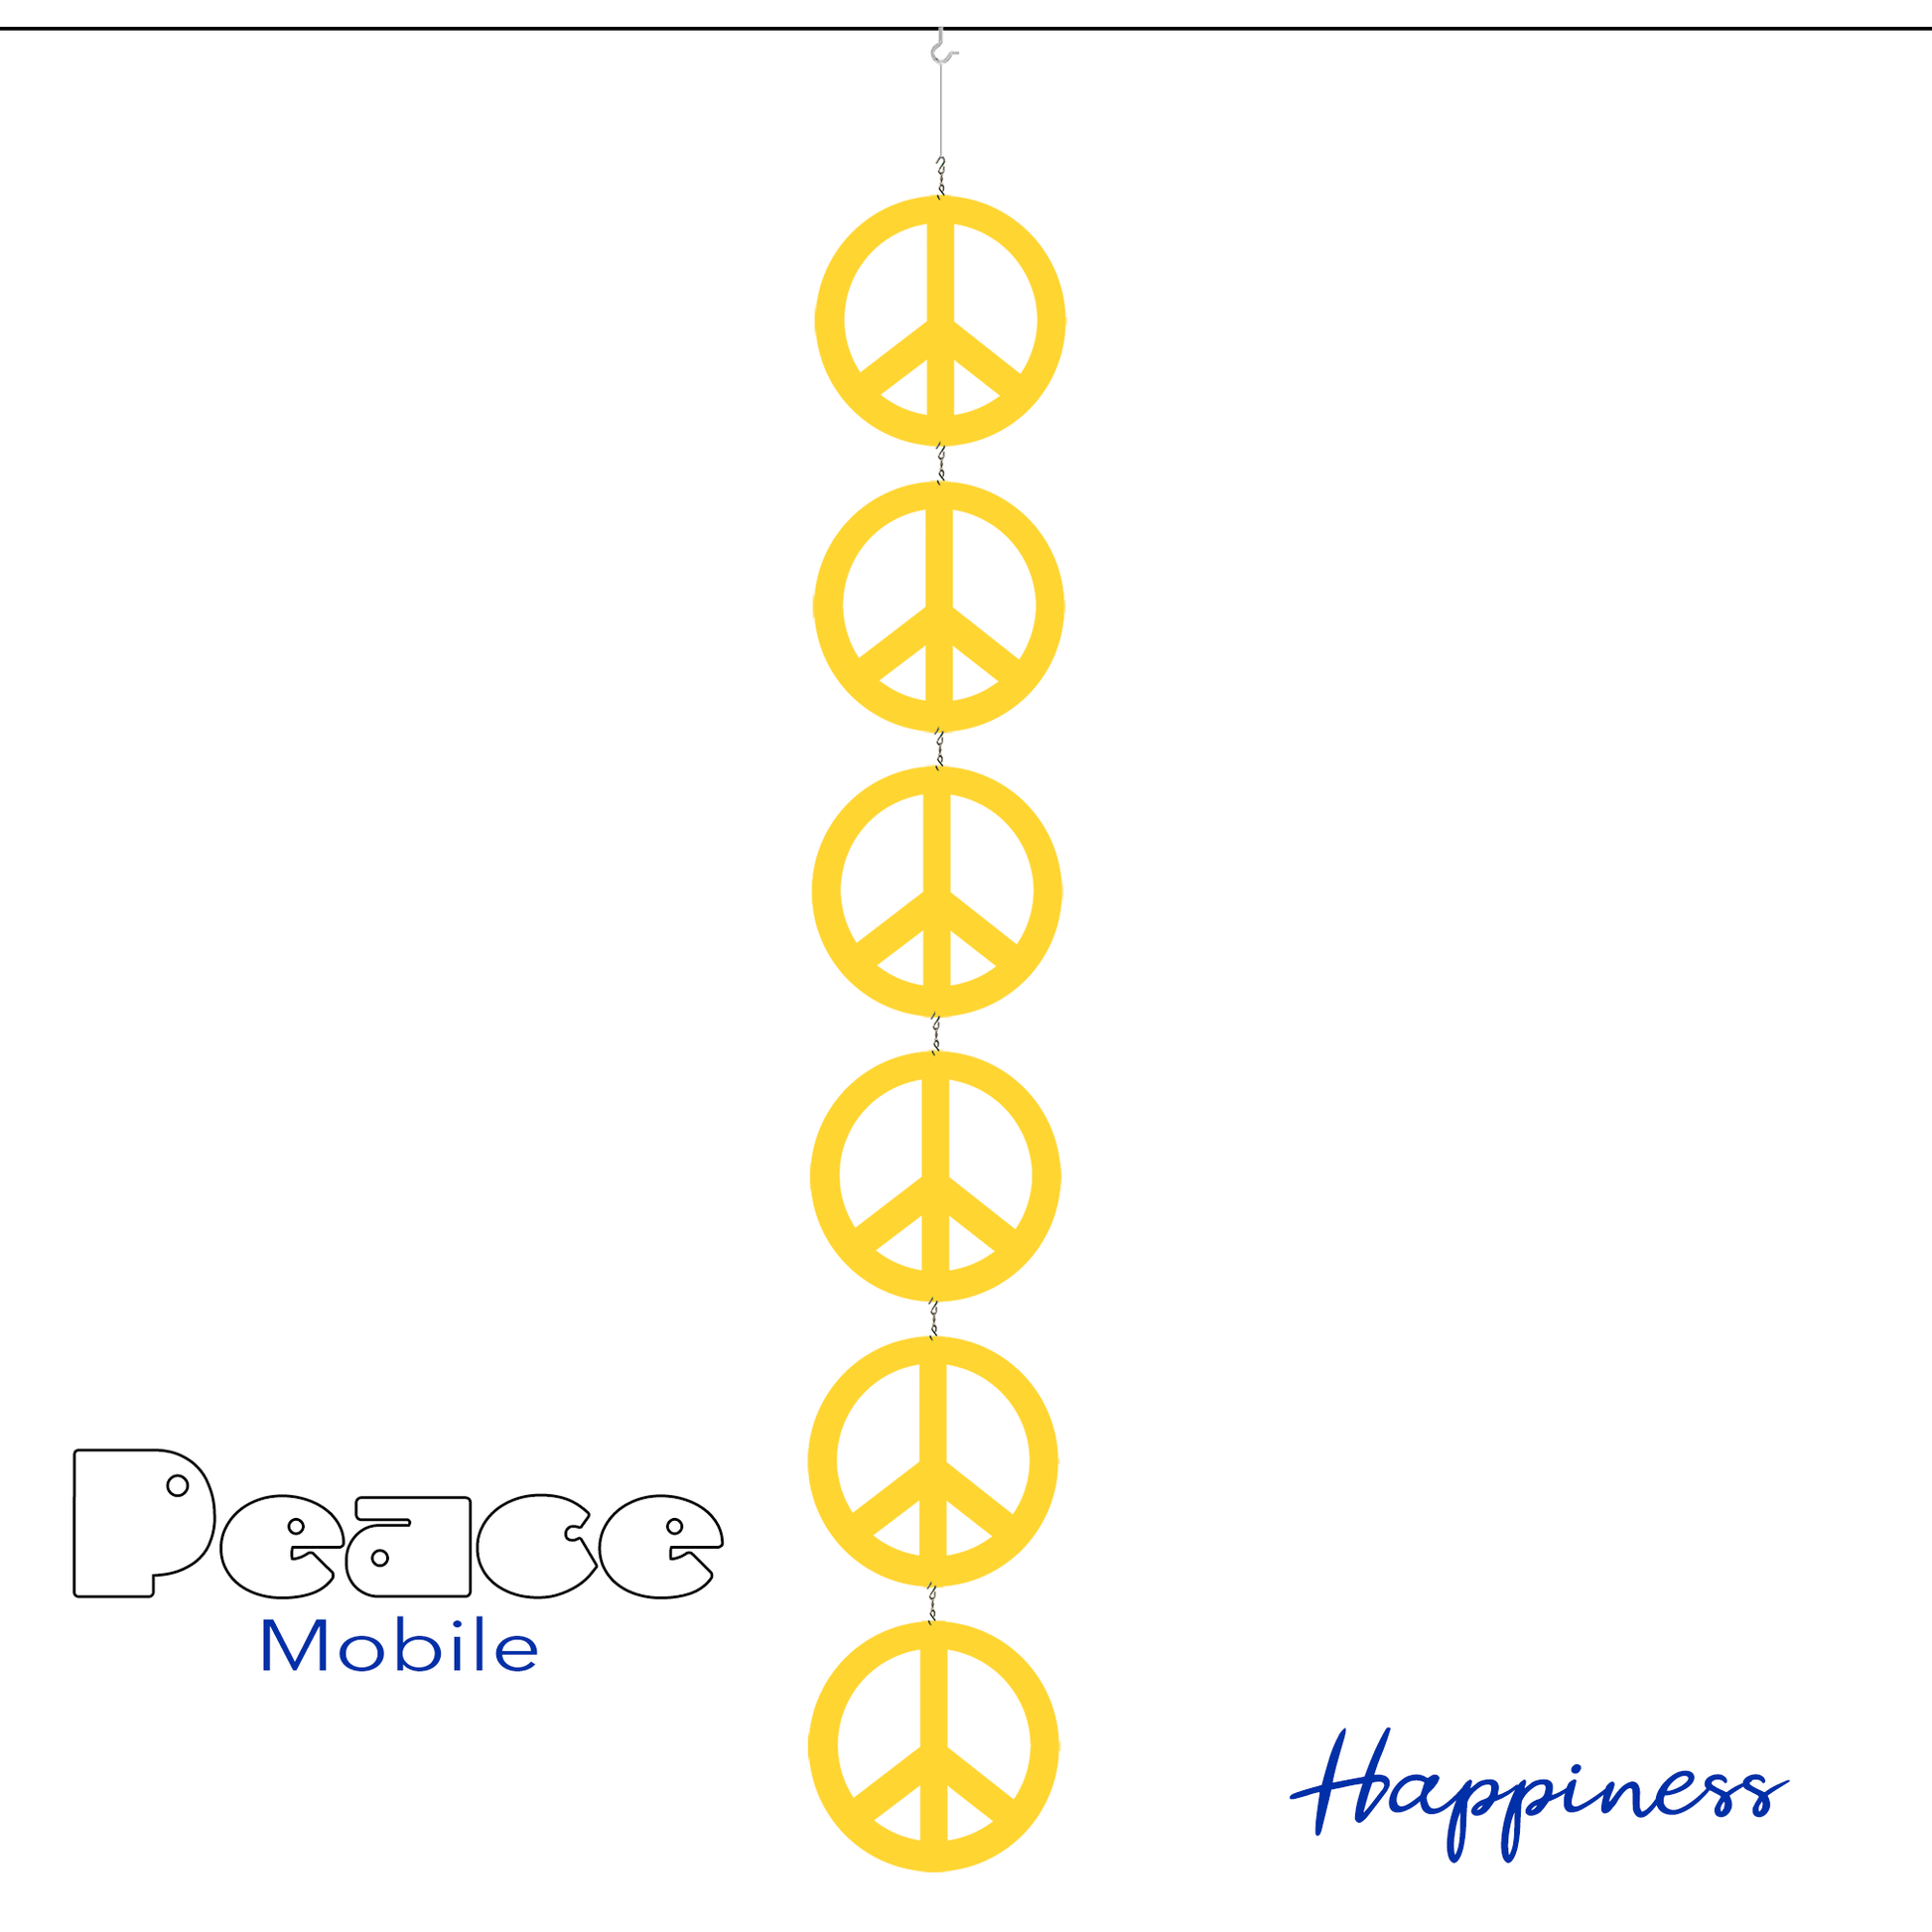 Happiness Peace Mobile - 6 Peace signs in yellow - kinetic hanging art mobile symbolizes World Peace - by AtomicMobiles.com